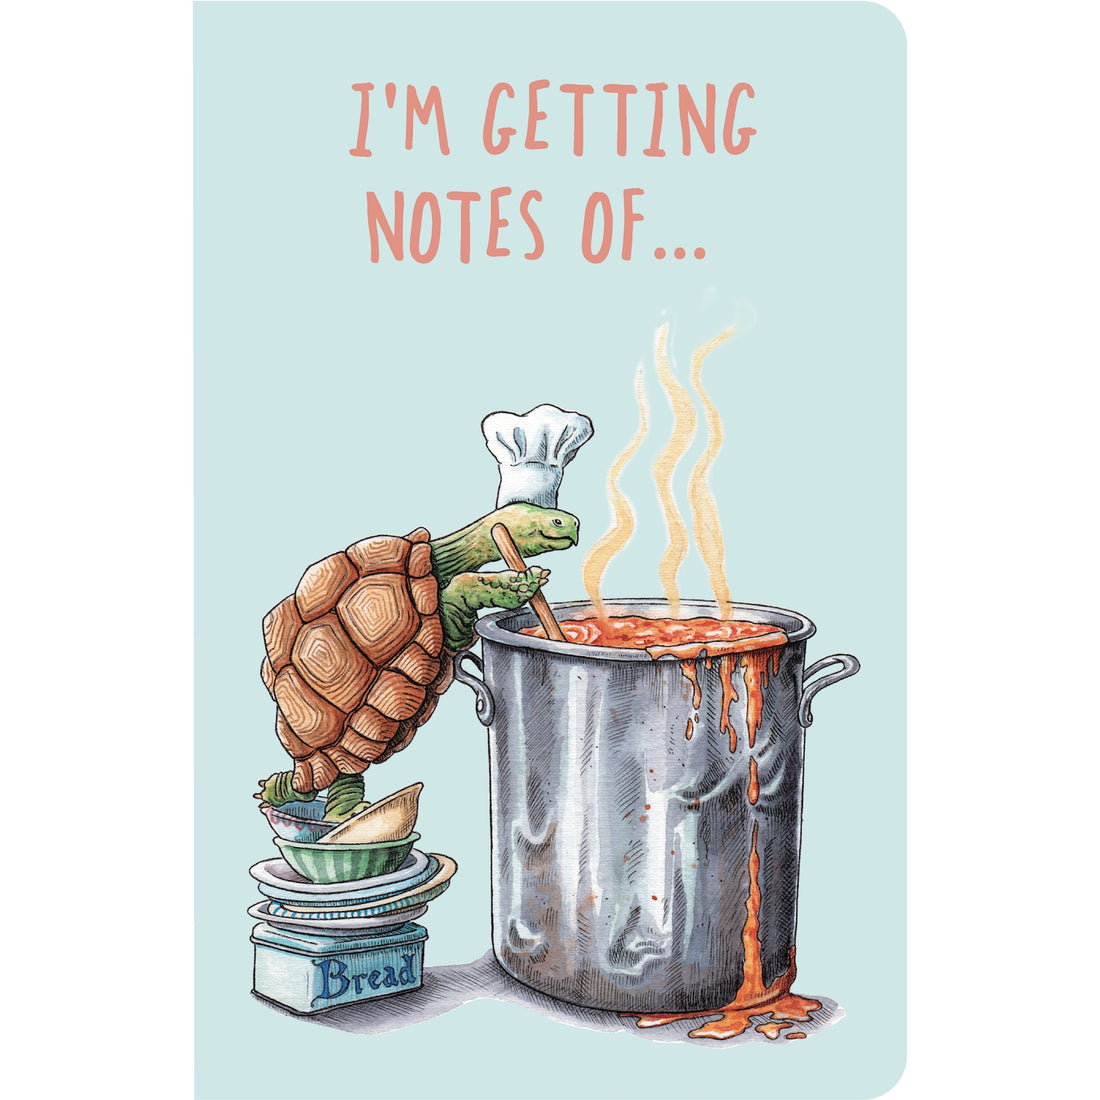 The front cover of the Chef Thoughts Notebook features whimsical artwork of a turtle in a chef&